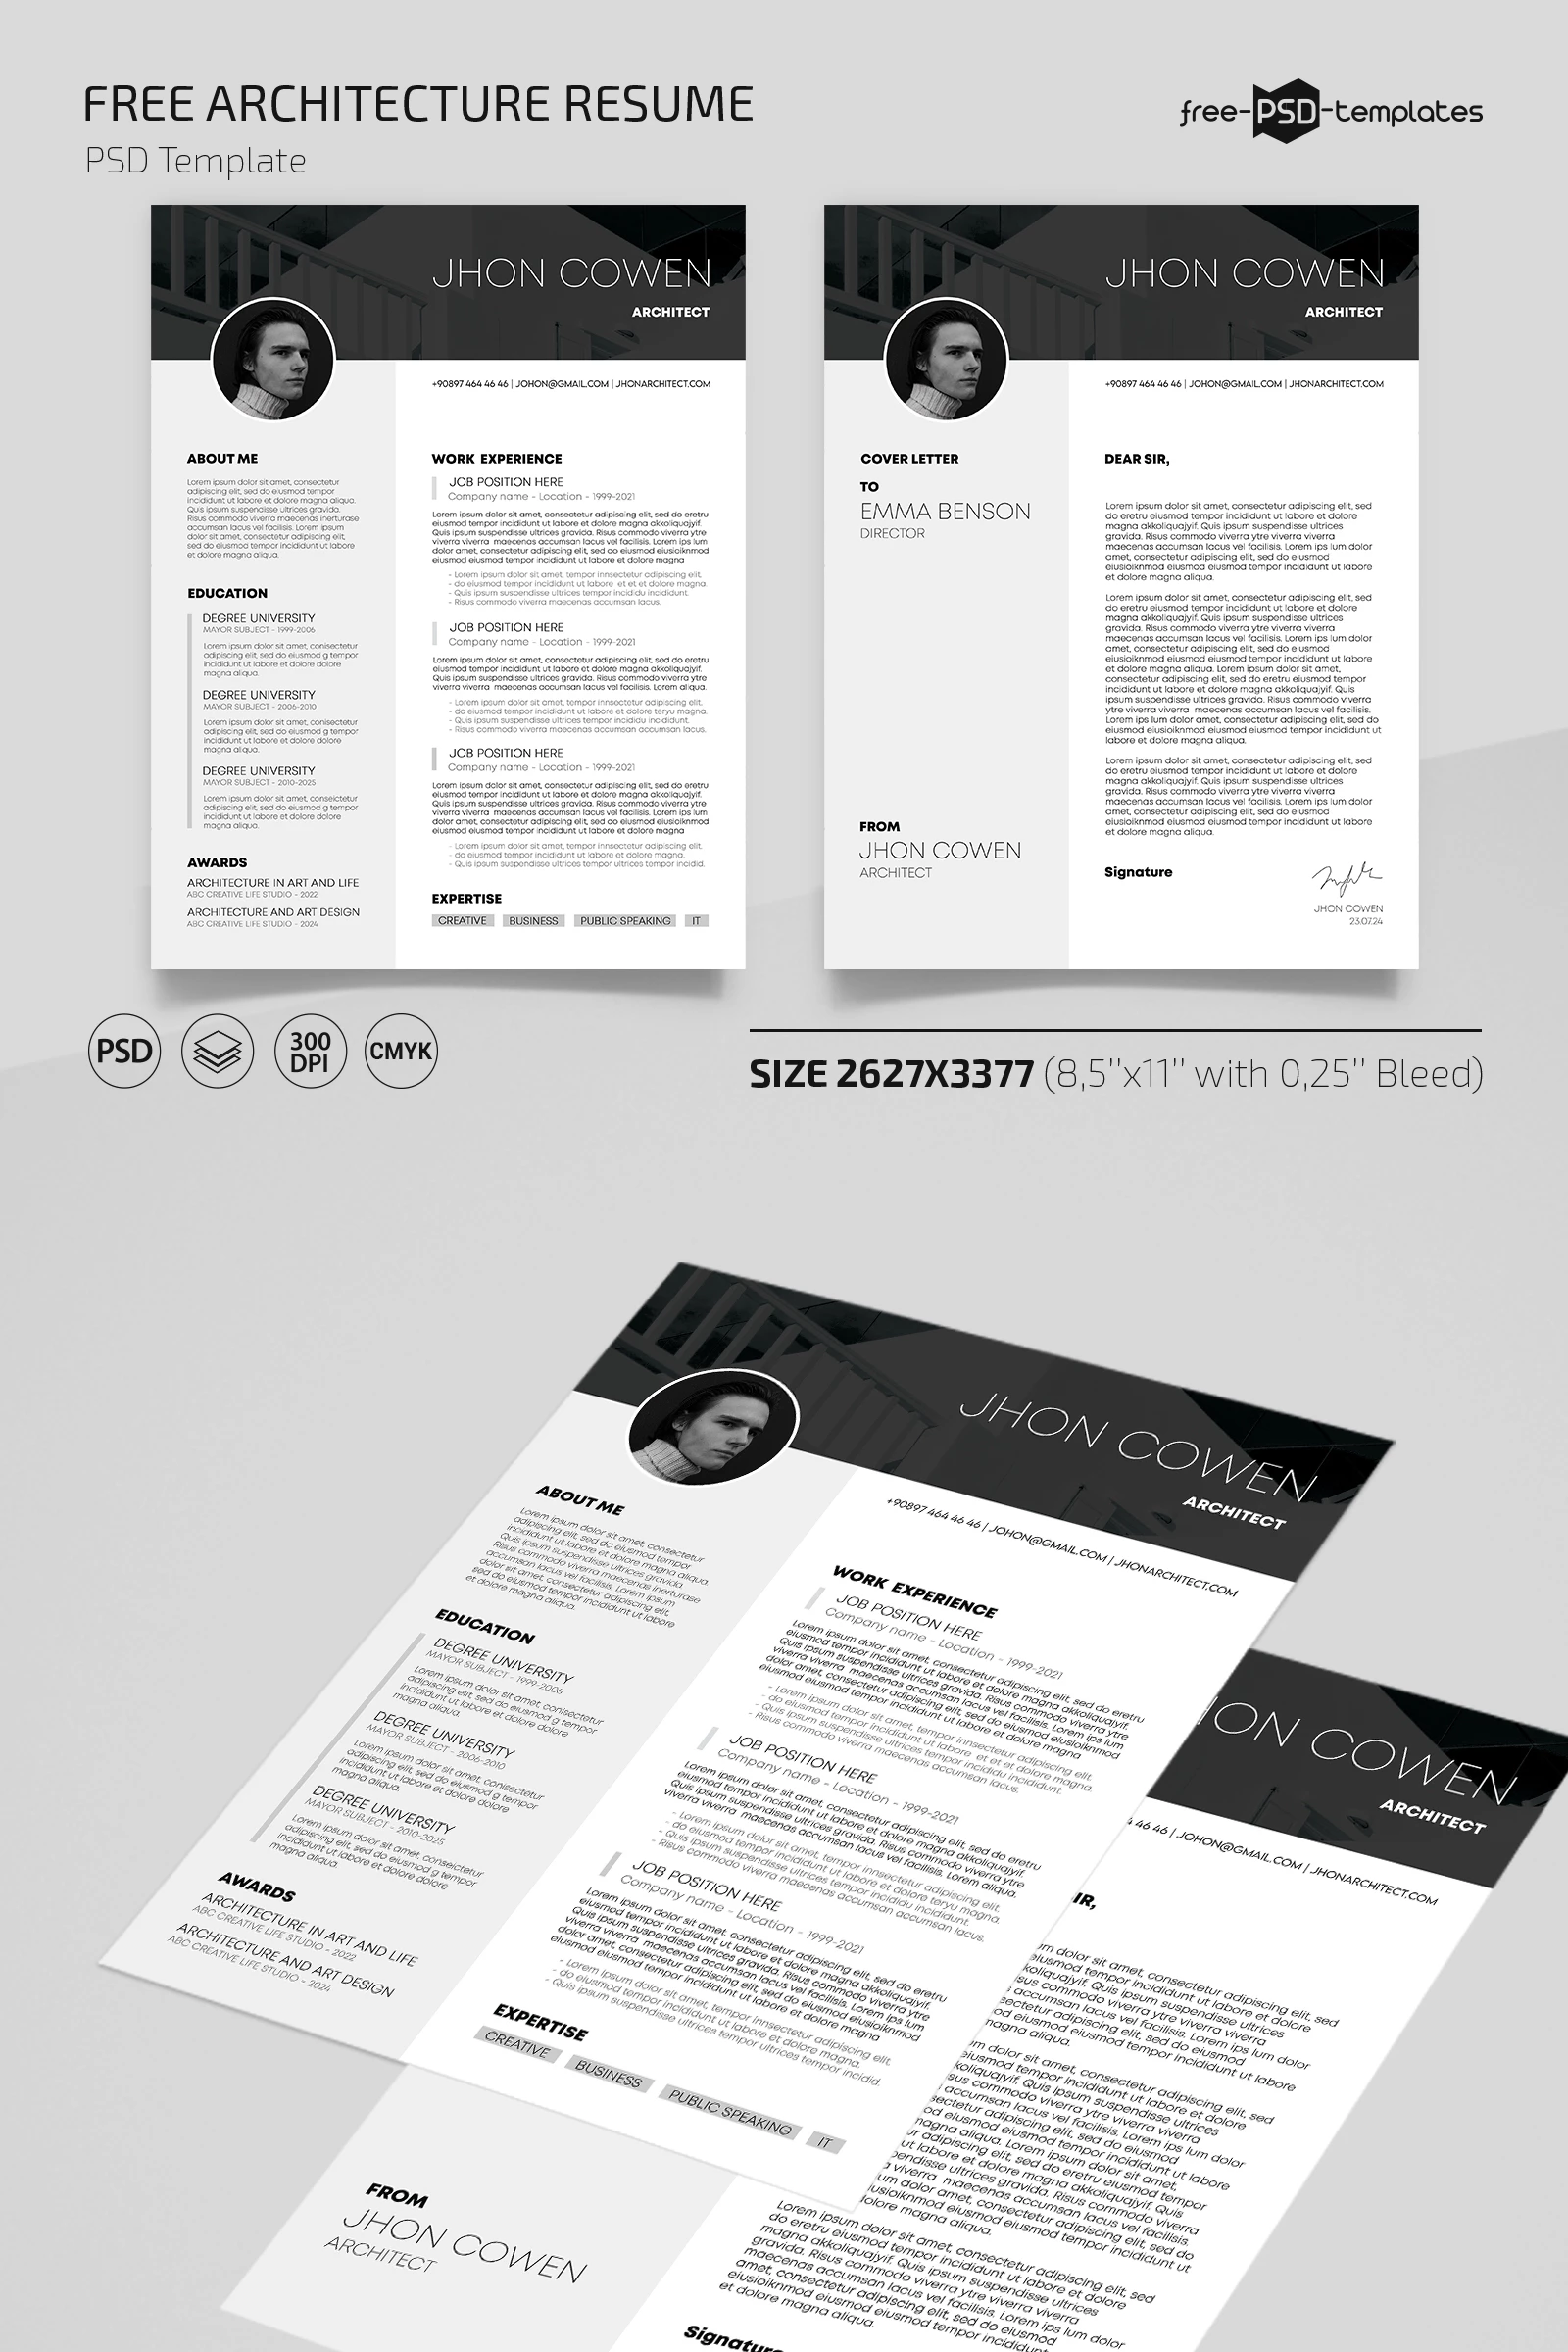 Free Architecture Resume Template in PSD